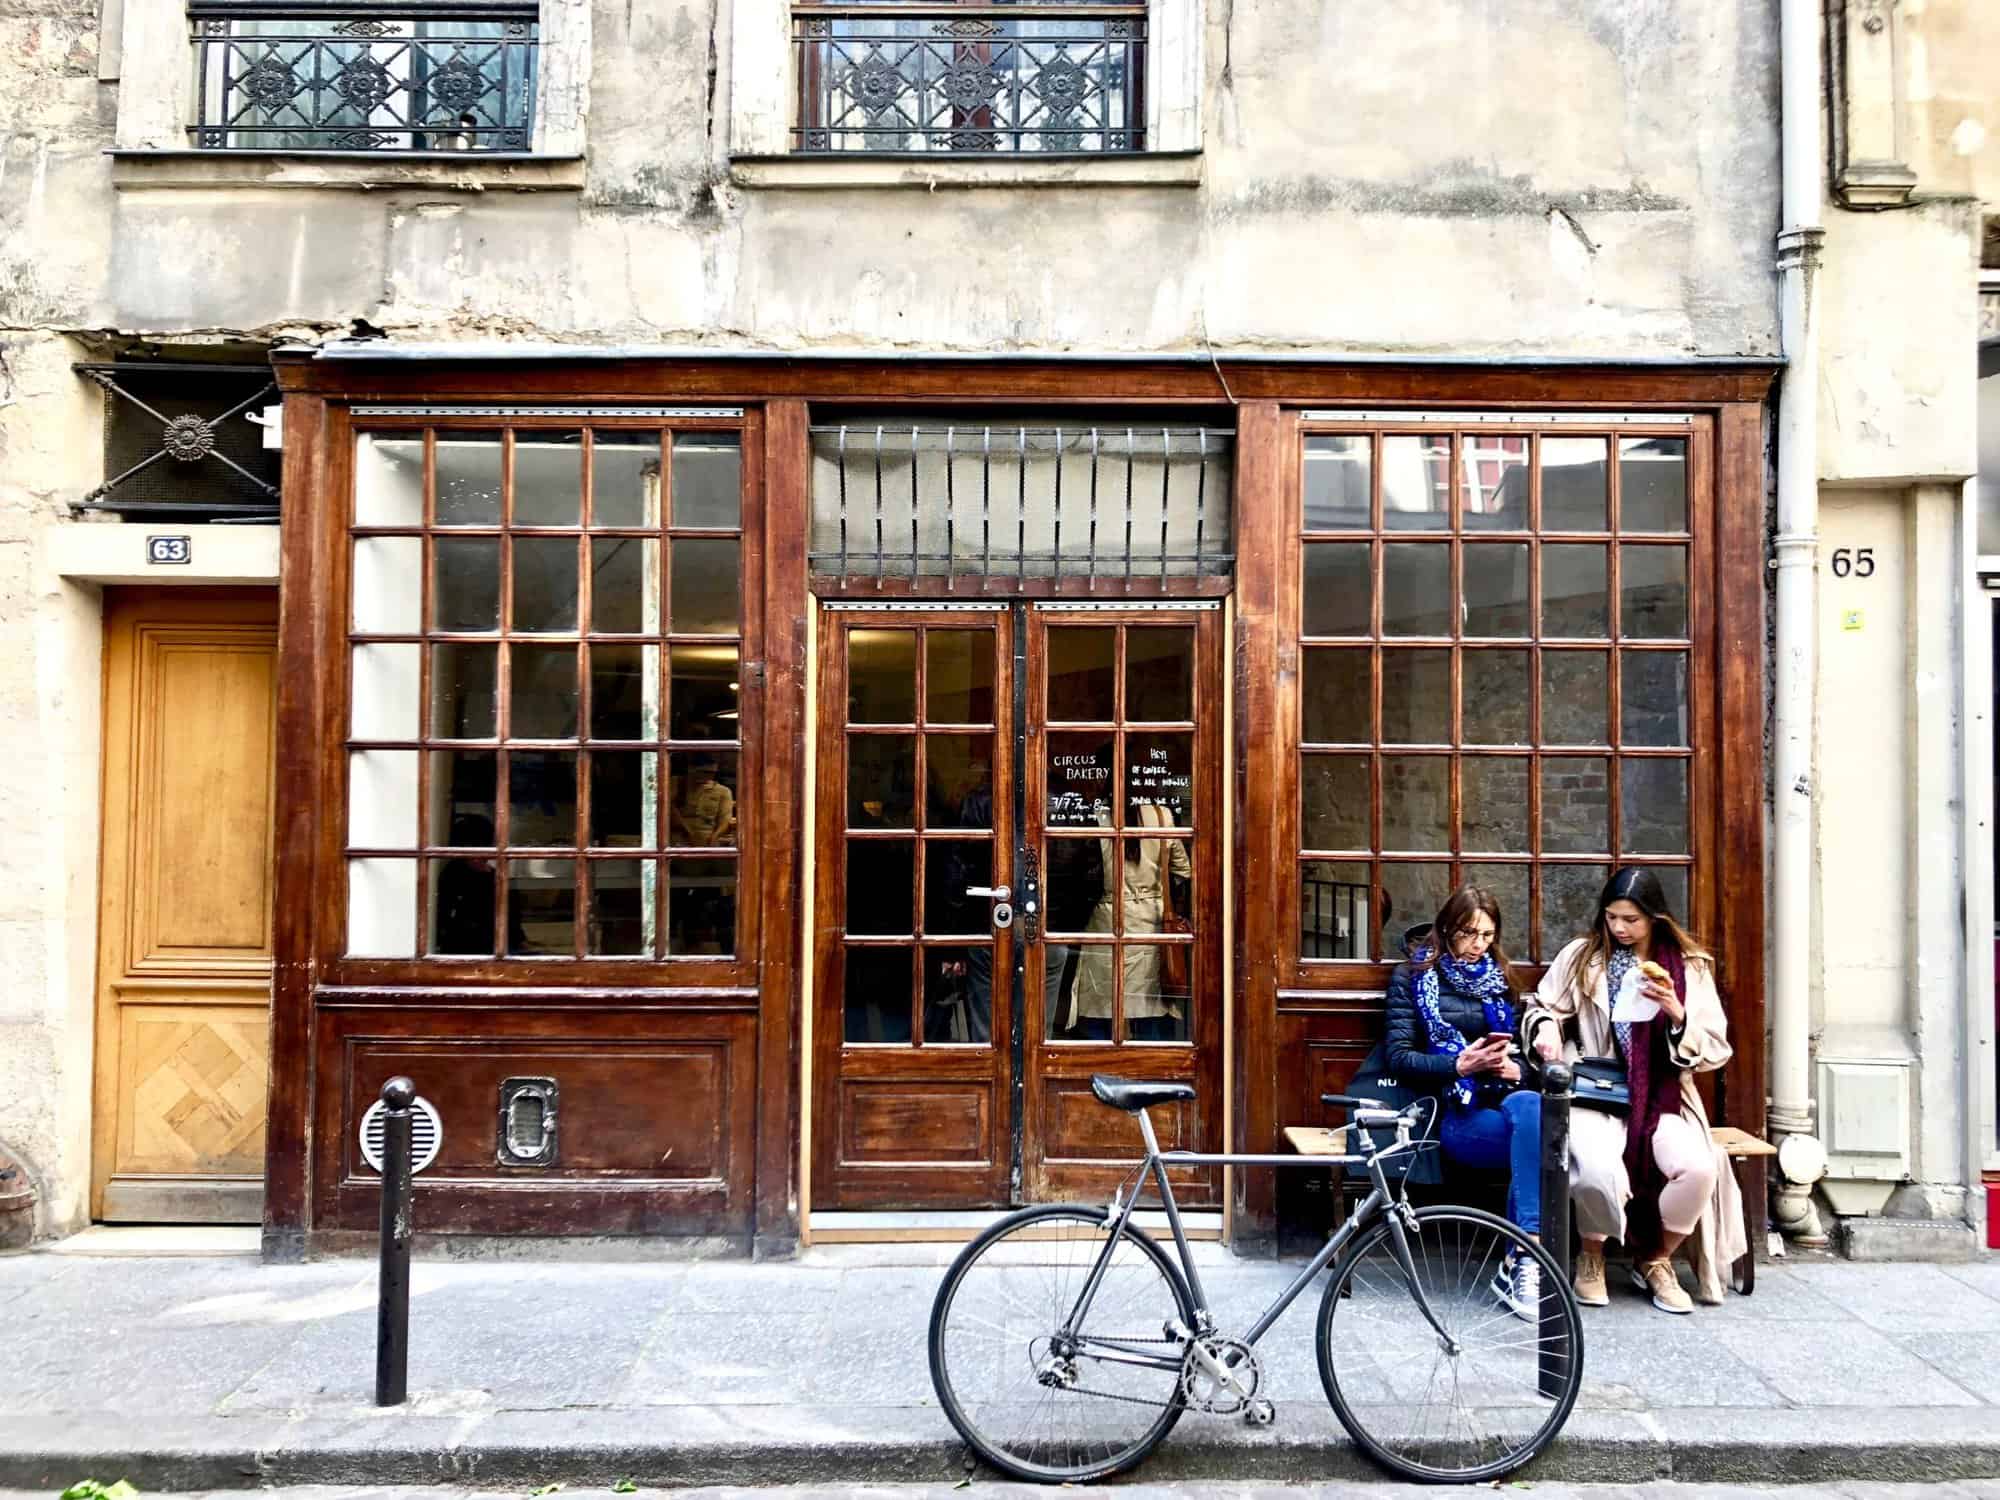 The old wooden exterior of Circus Bakery in Paris with two women sitting outside on a bench.